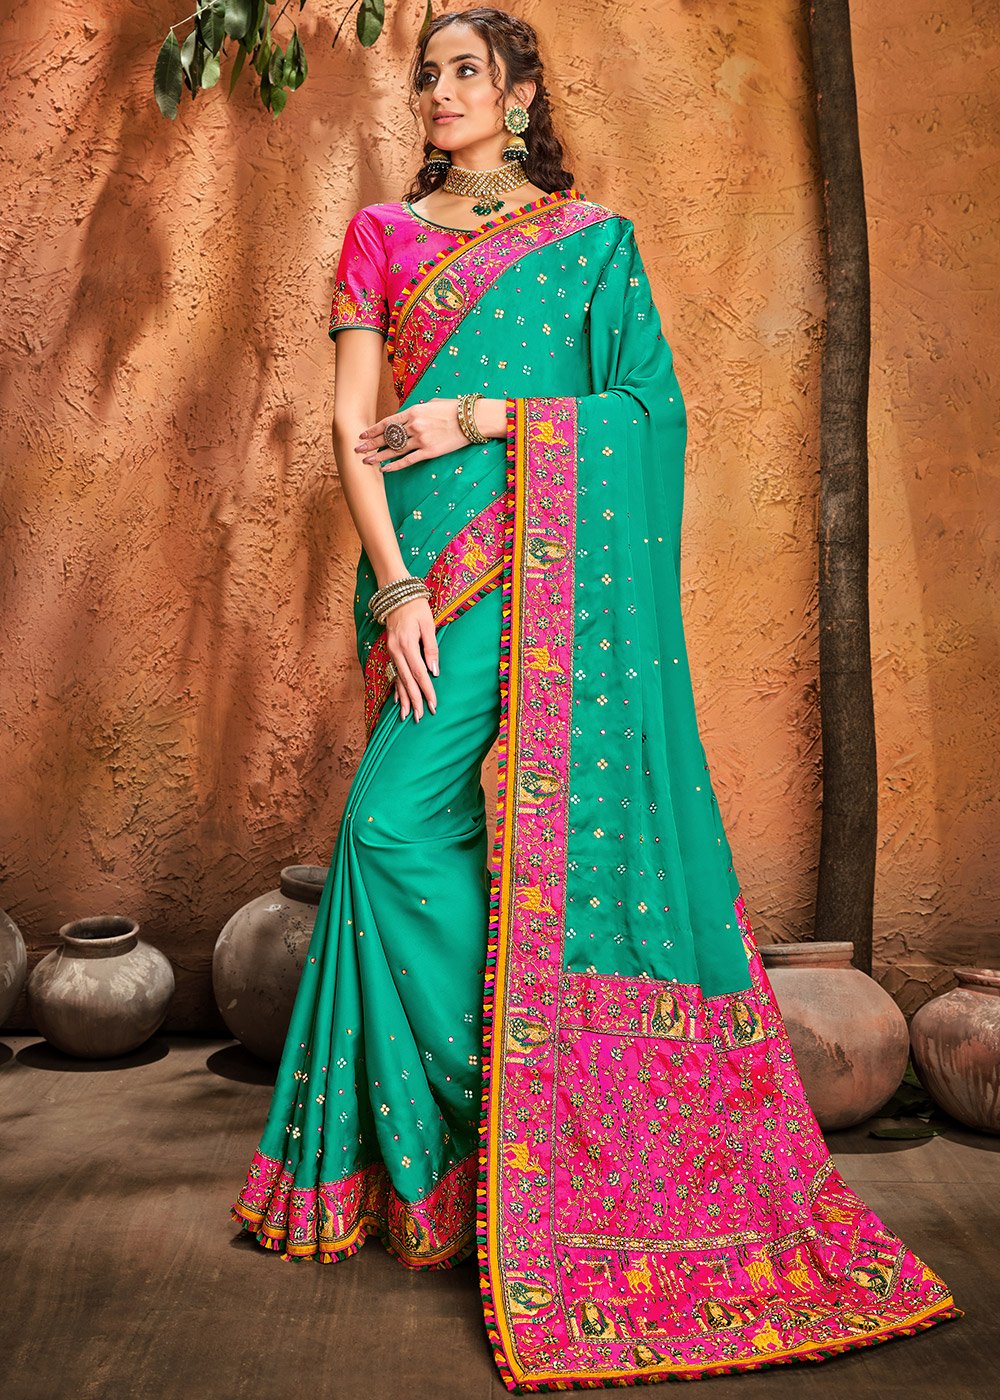 Buy VANYA Women's Silk Embroidered Woven Green Saree with Rani Pink Blouse  (M10702) at Amazon.in